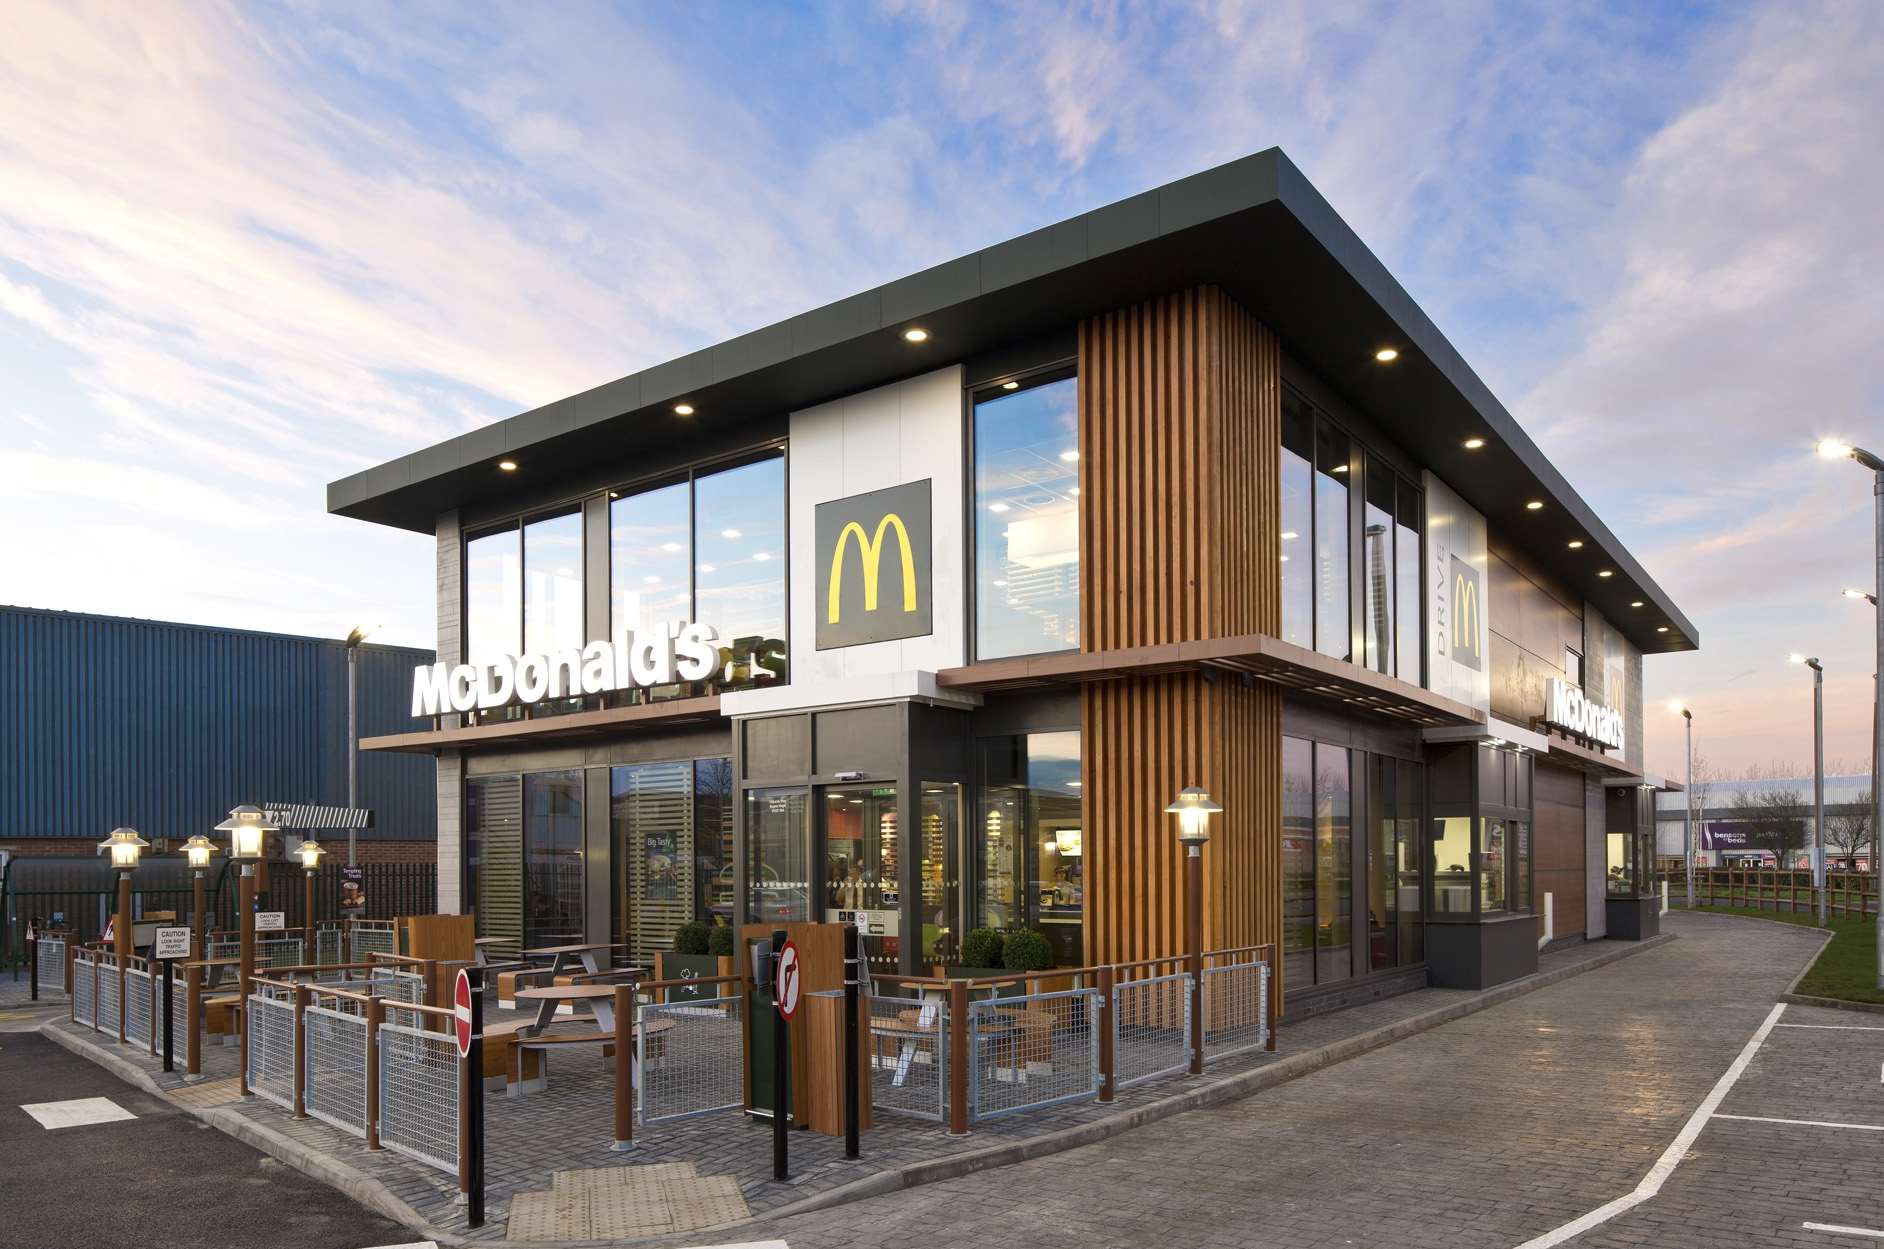 An artist's impression of what the new drive-thru McDonalds will look like